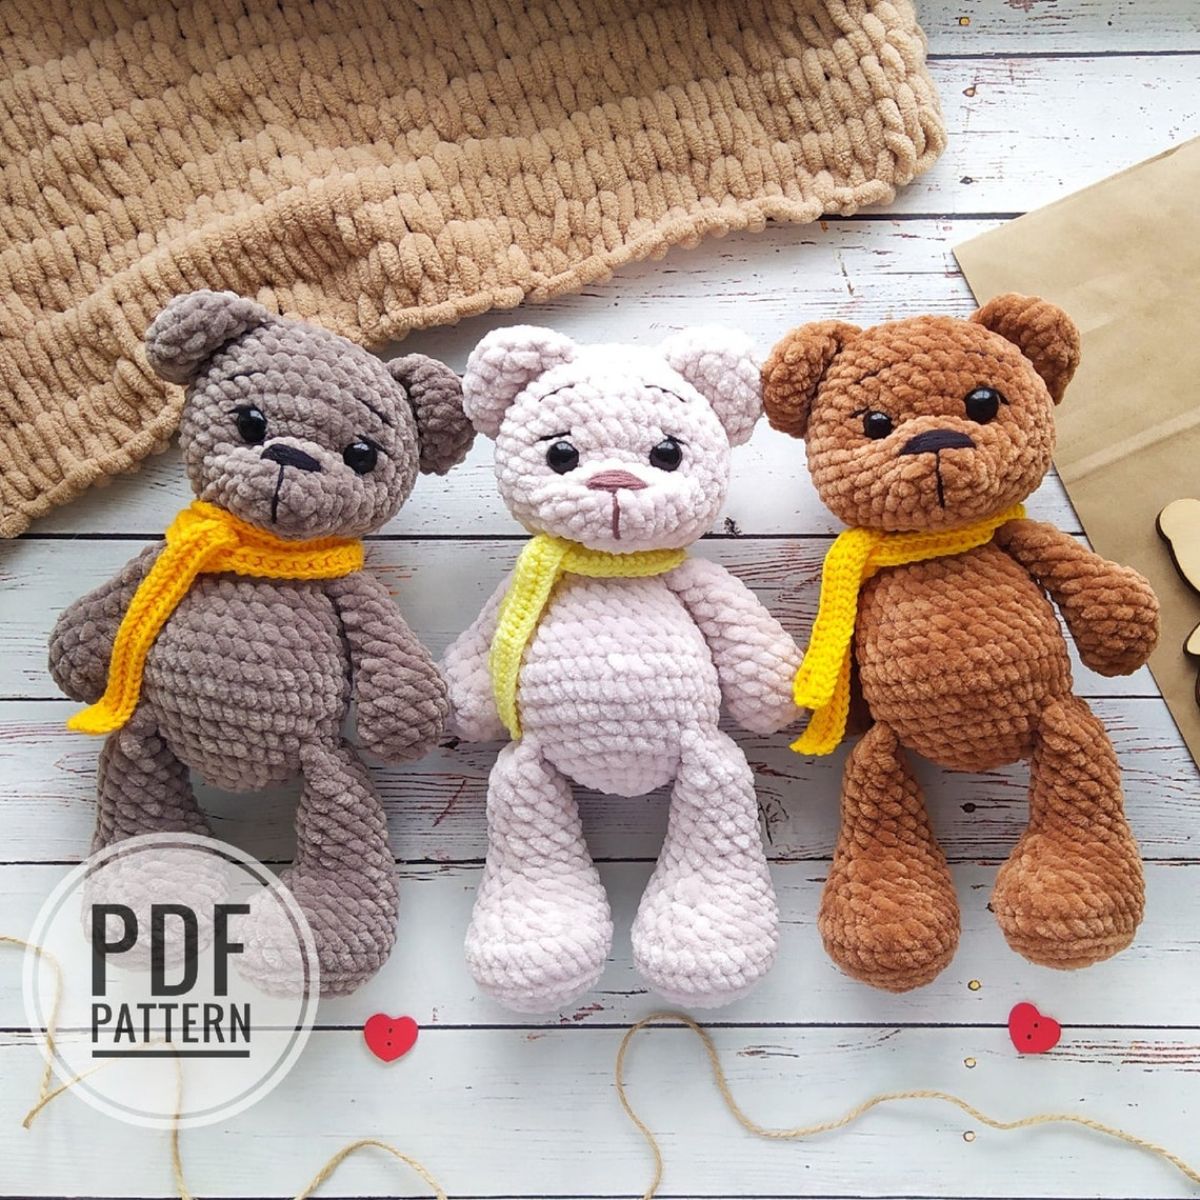 A light brown, white, and dark brown crochet teddy bears all wearing yellow scarves lying in a line on a white wooden floor.